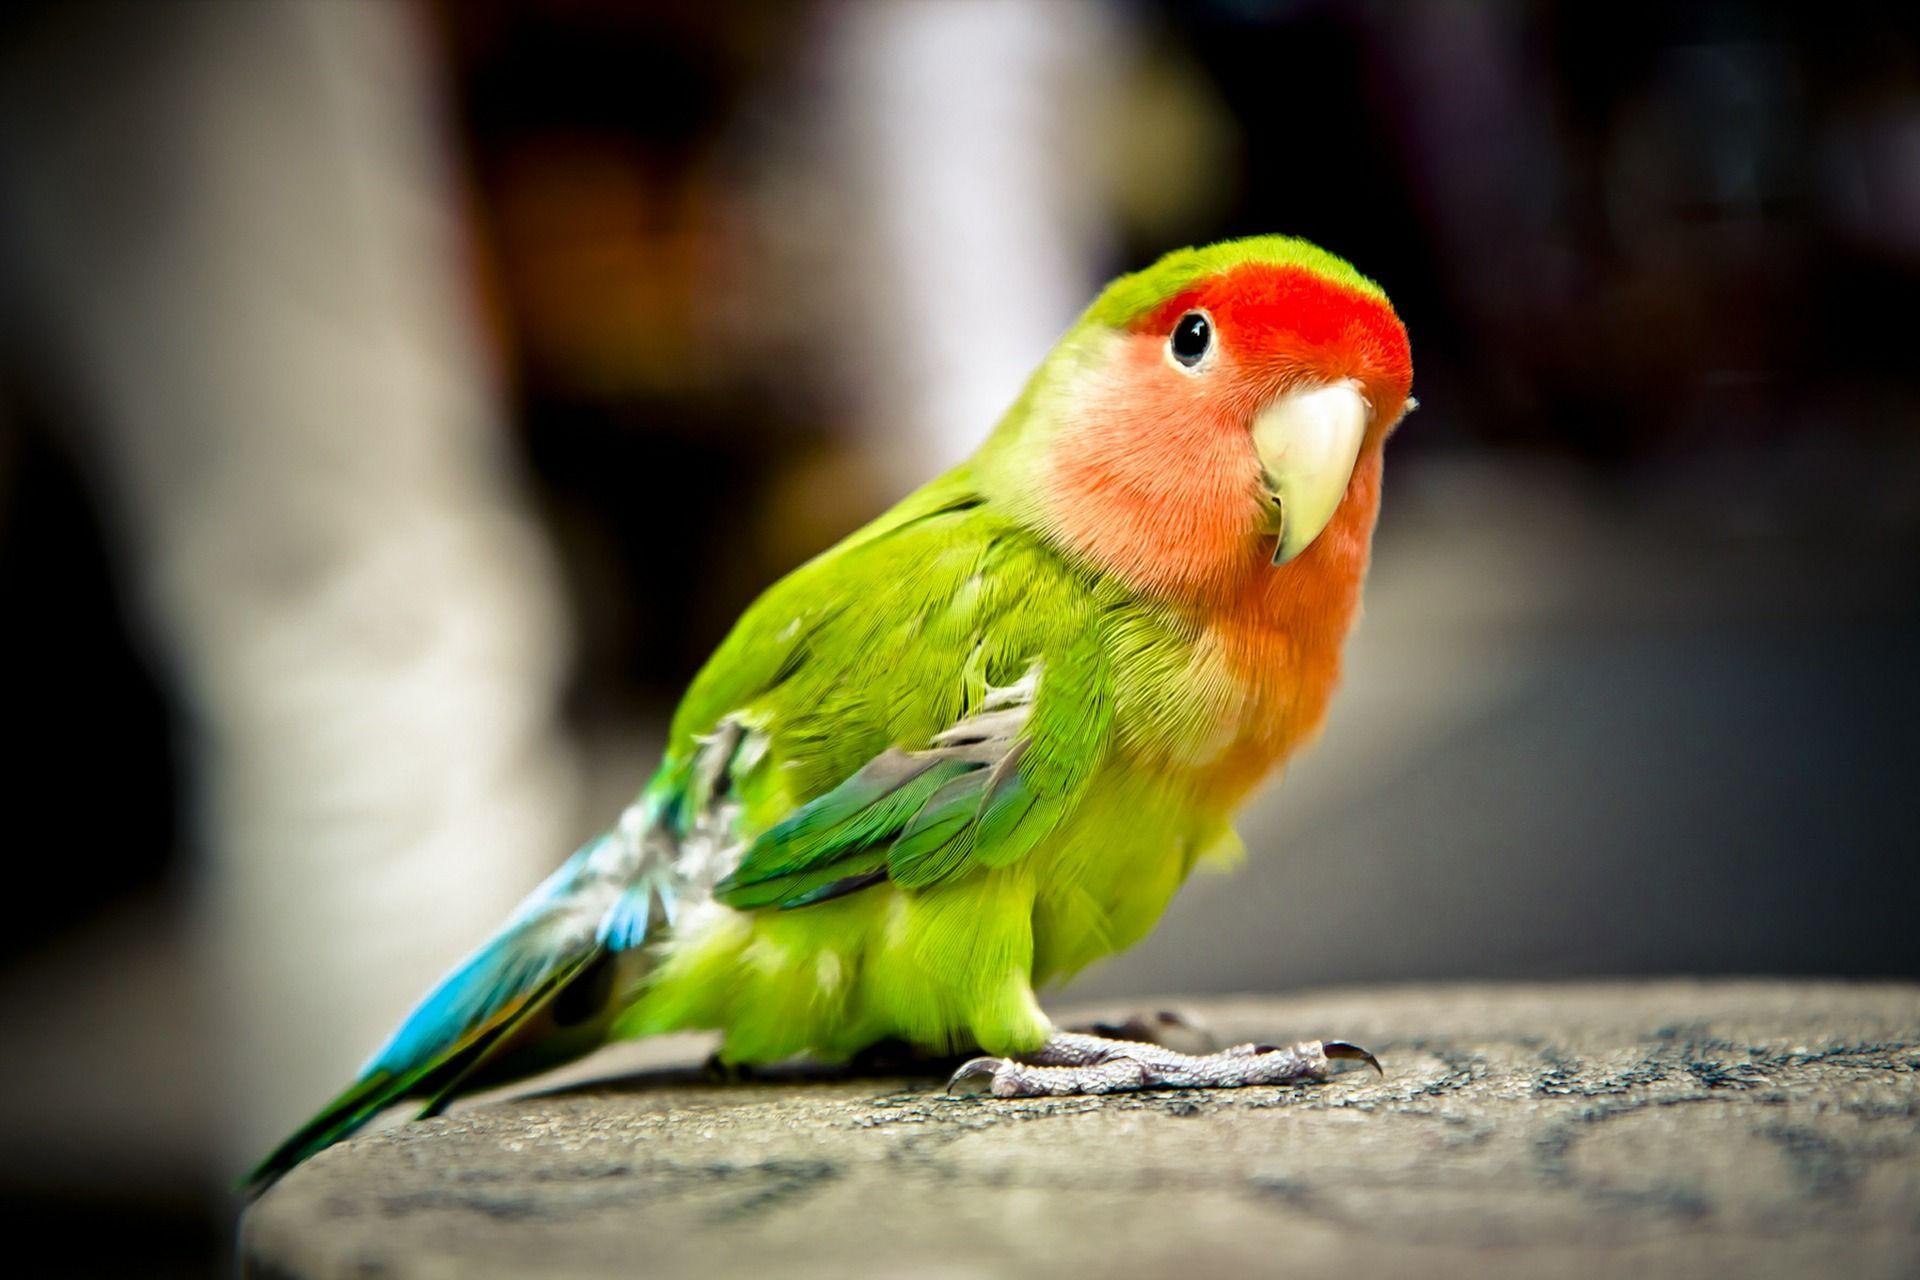 Parrot Wallpaper. Free HD Colorful Image